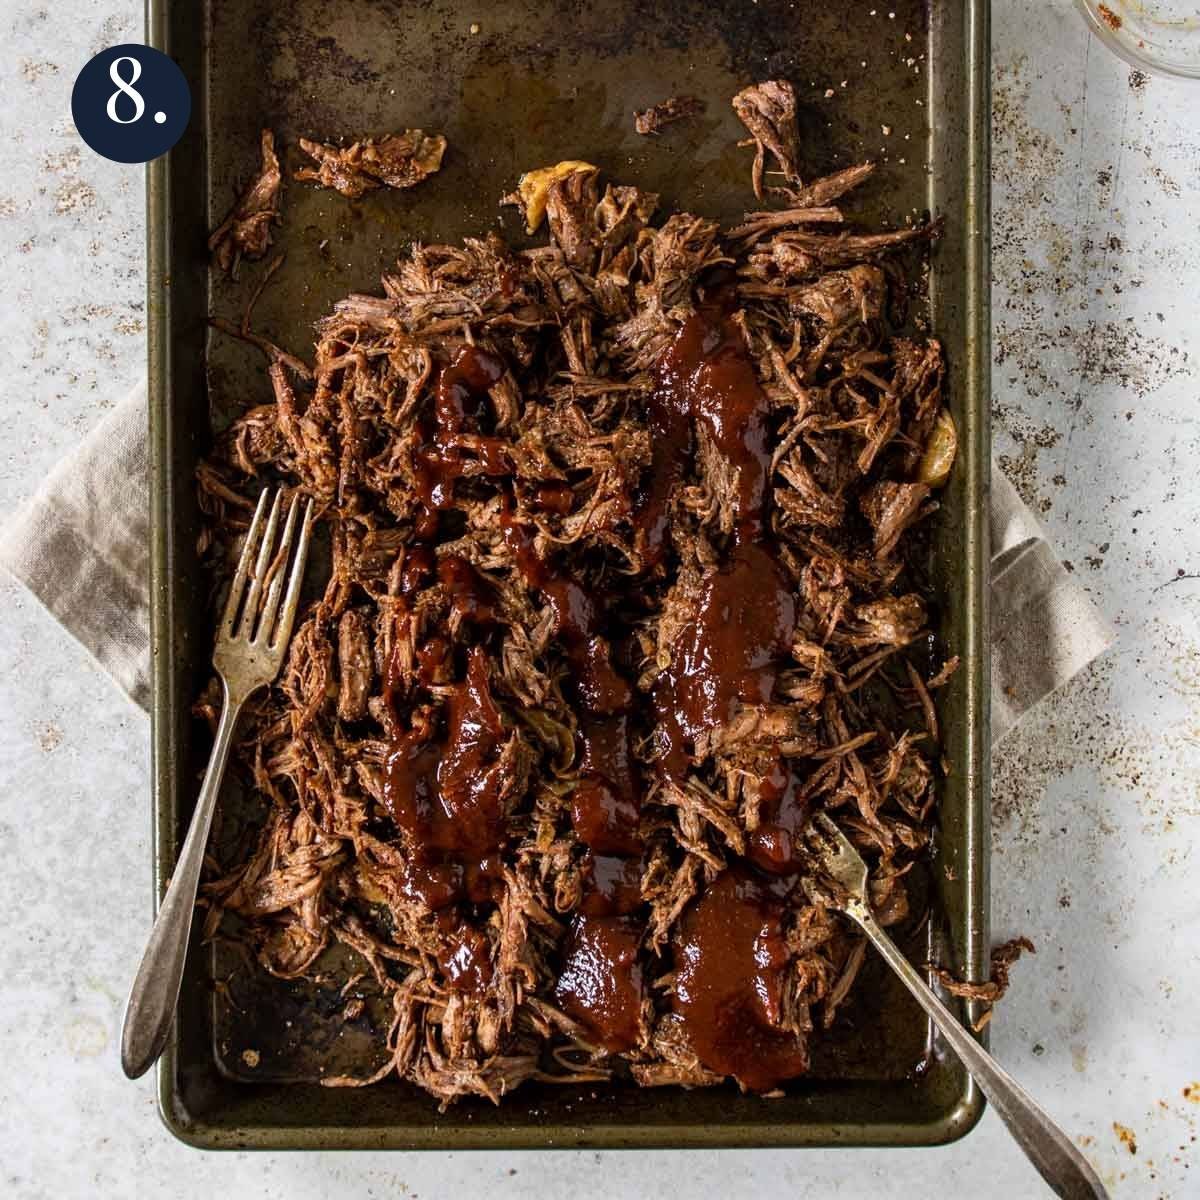 a rimmed baking sheet with shredded beef coated in BBQ sauce